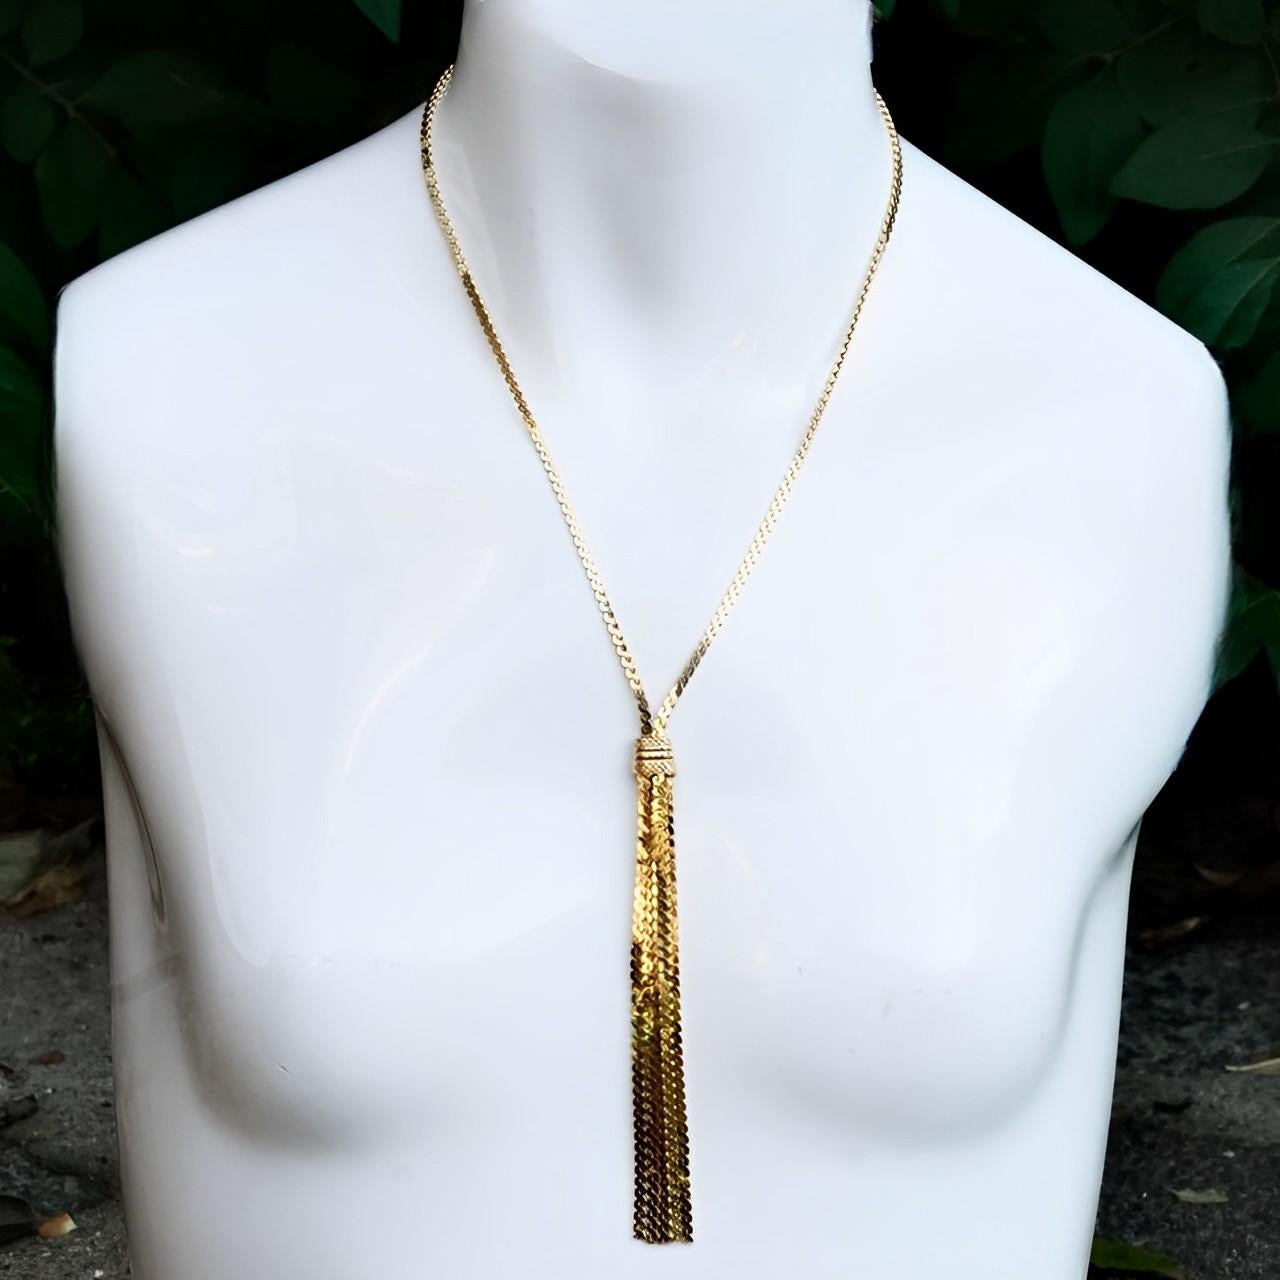 Gold Plated Plaited Serpentine Chain Tassel Necklace circa 1980s For Sale 1